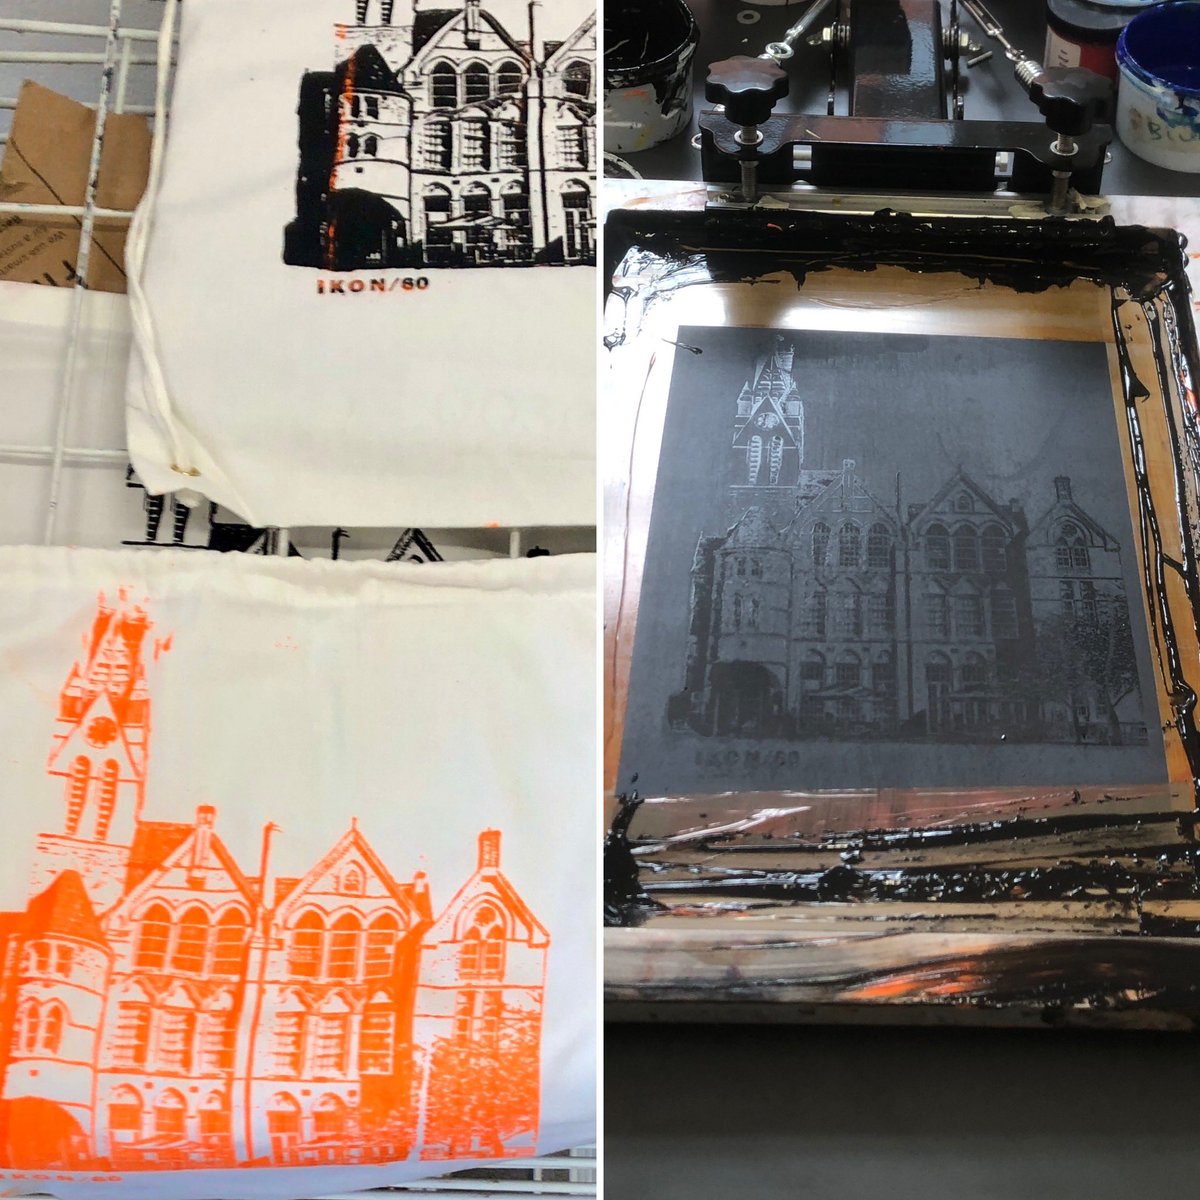 Well done Rosewood school students, for experimenting with different printmaking processes @ikongallery yesterday and printing your own tote-bags. A pleasure working alongside Will #ikon60 #artforall